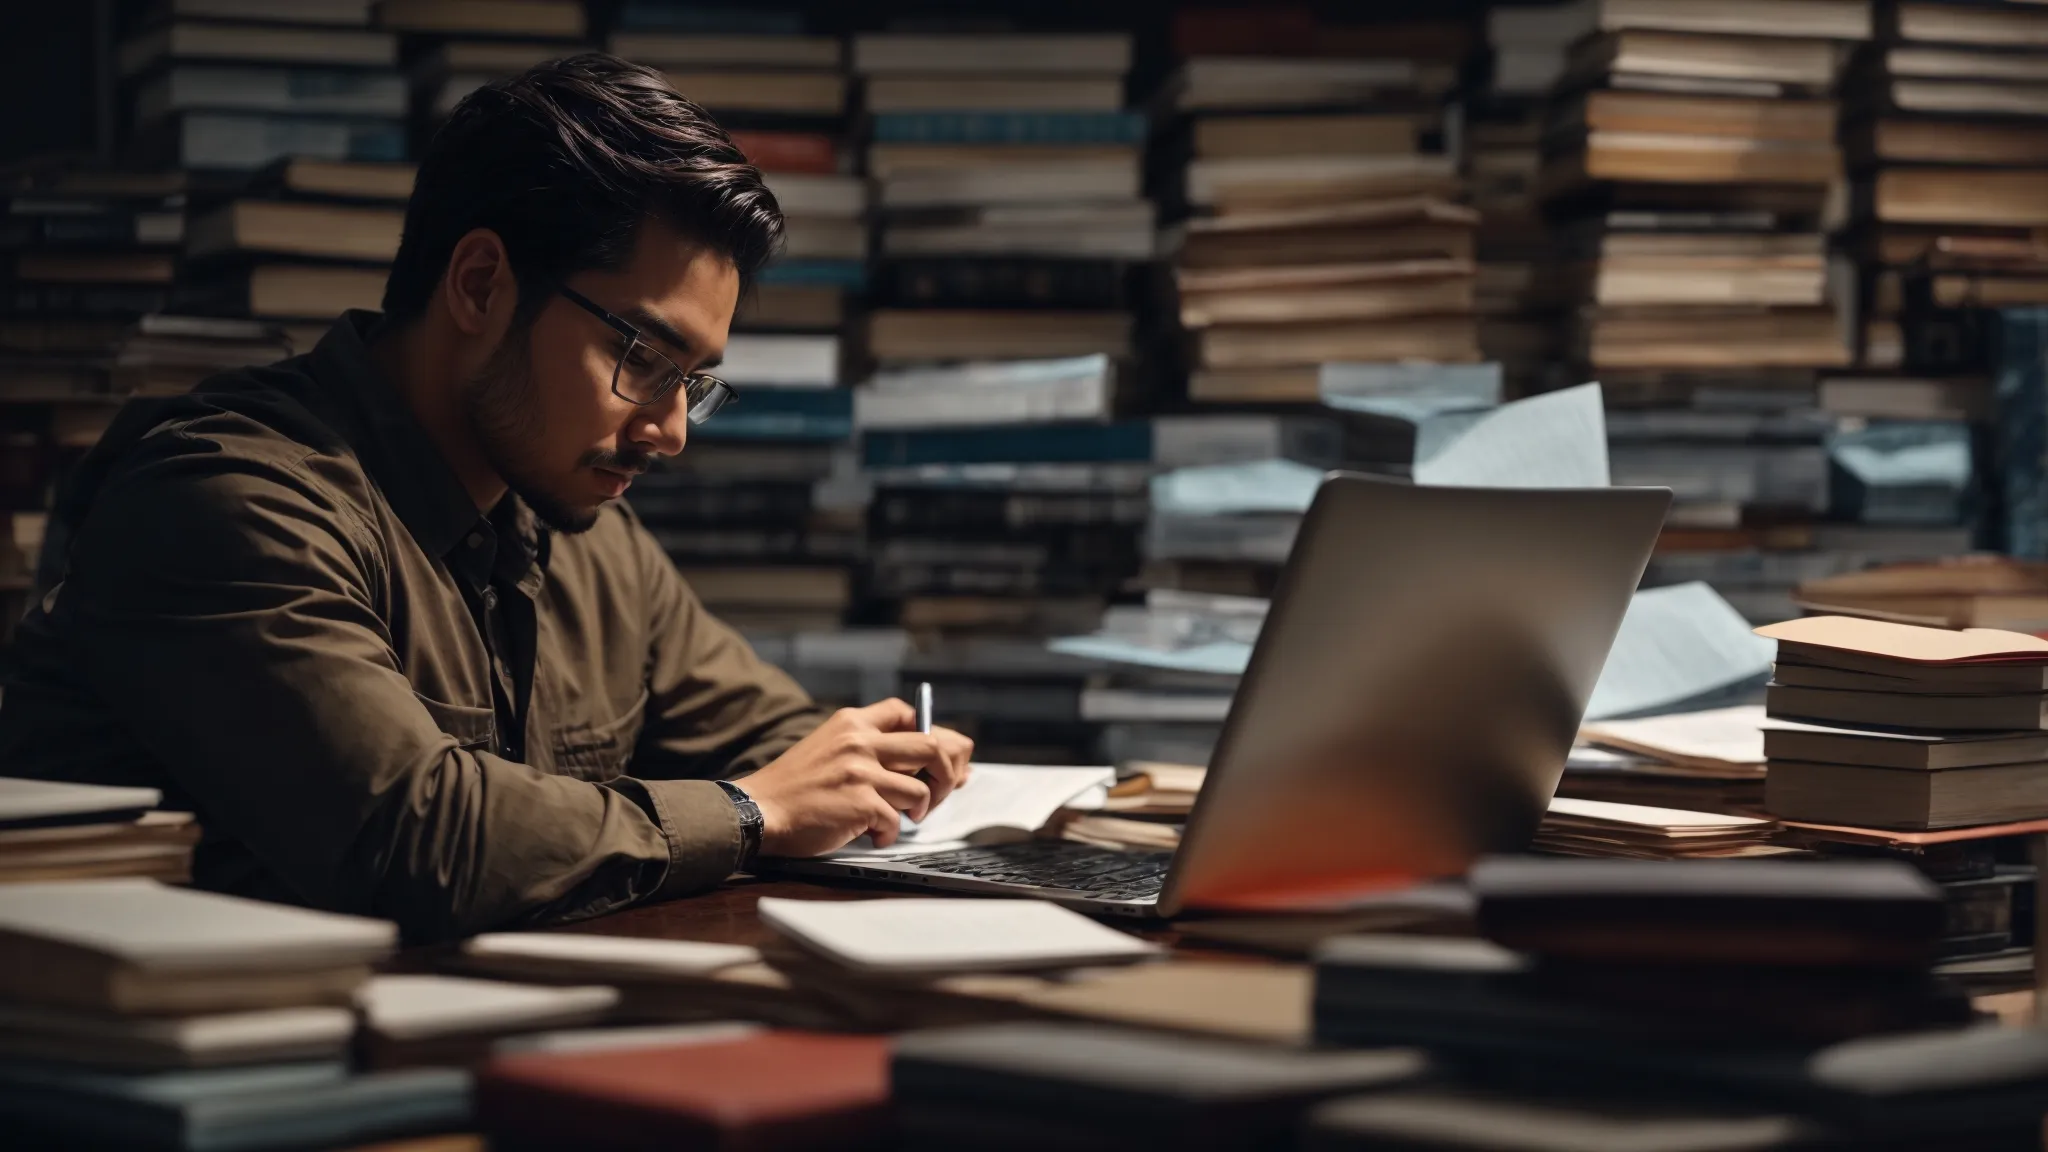 a focused individual working intently on a laptop surrounded by books and notes on seo and digital marketing.